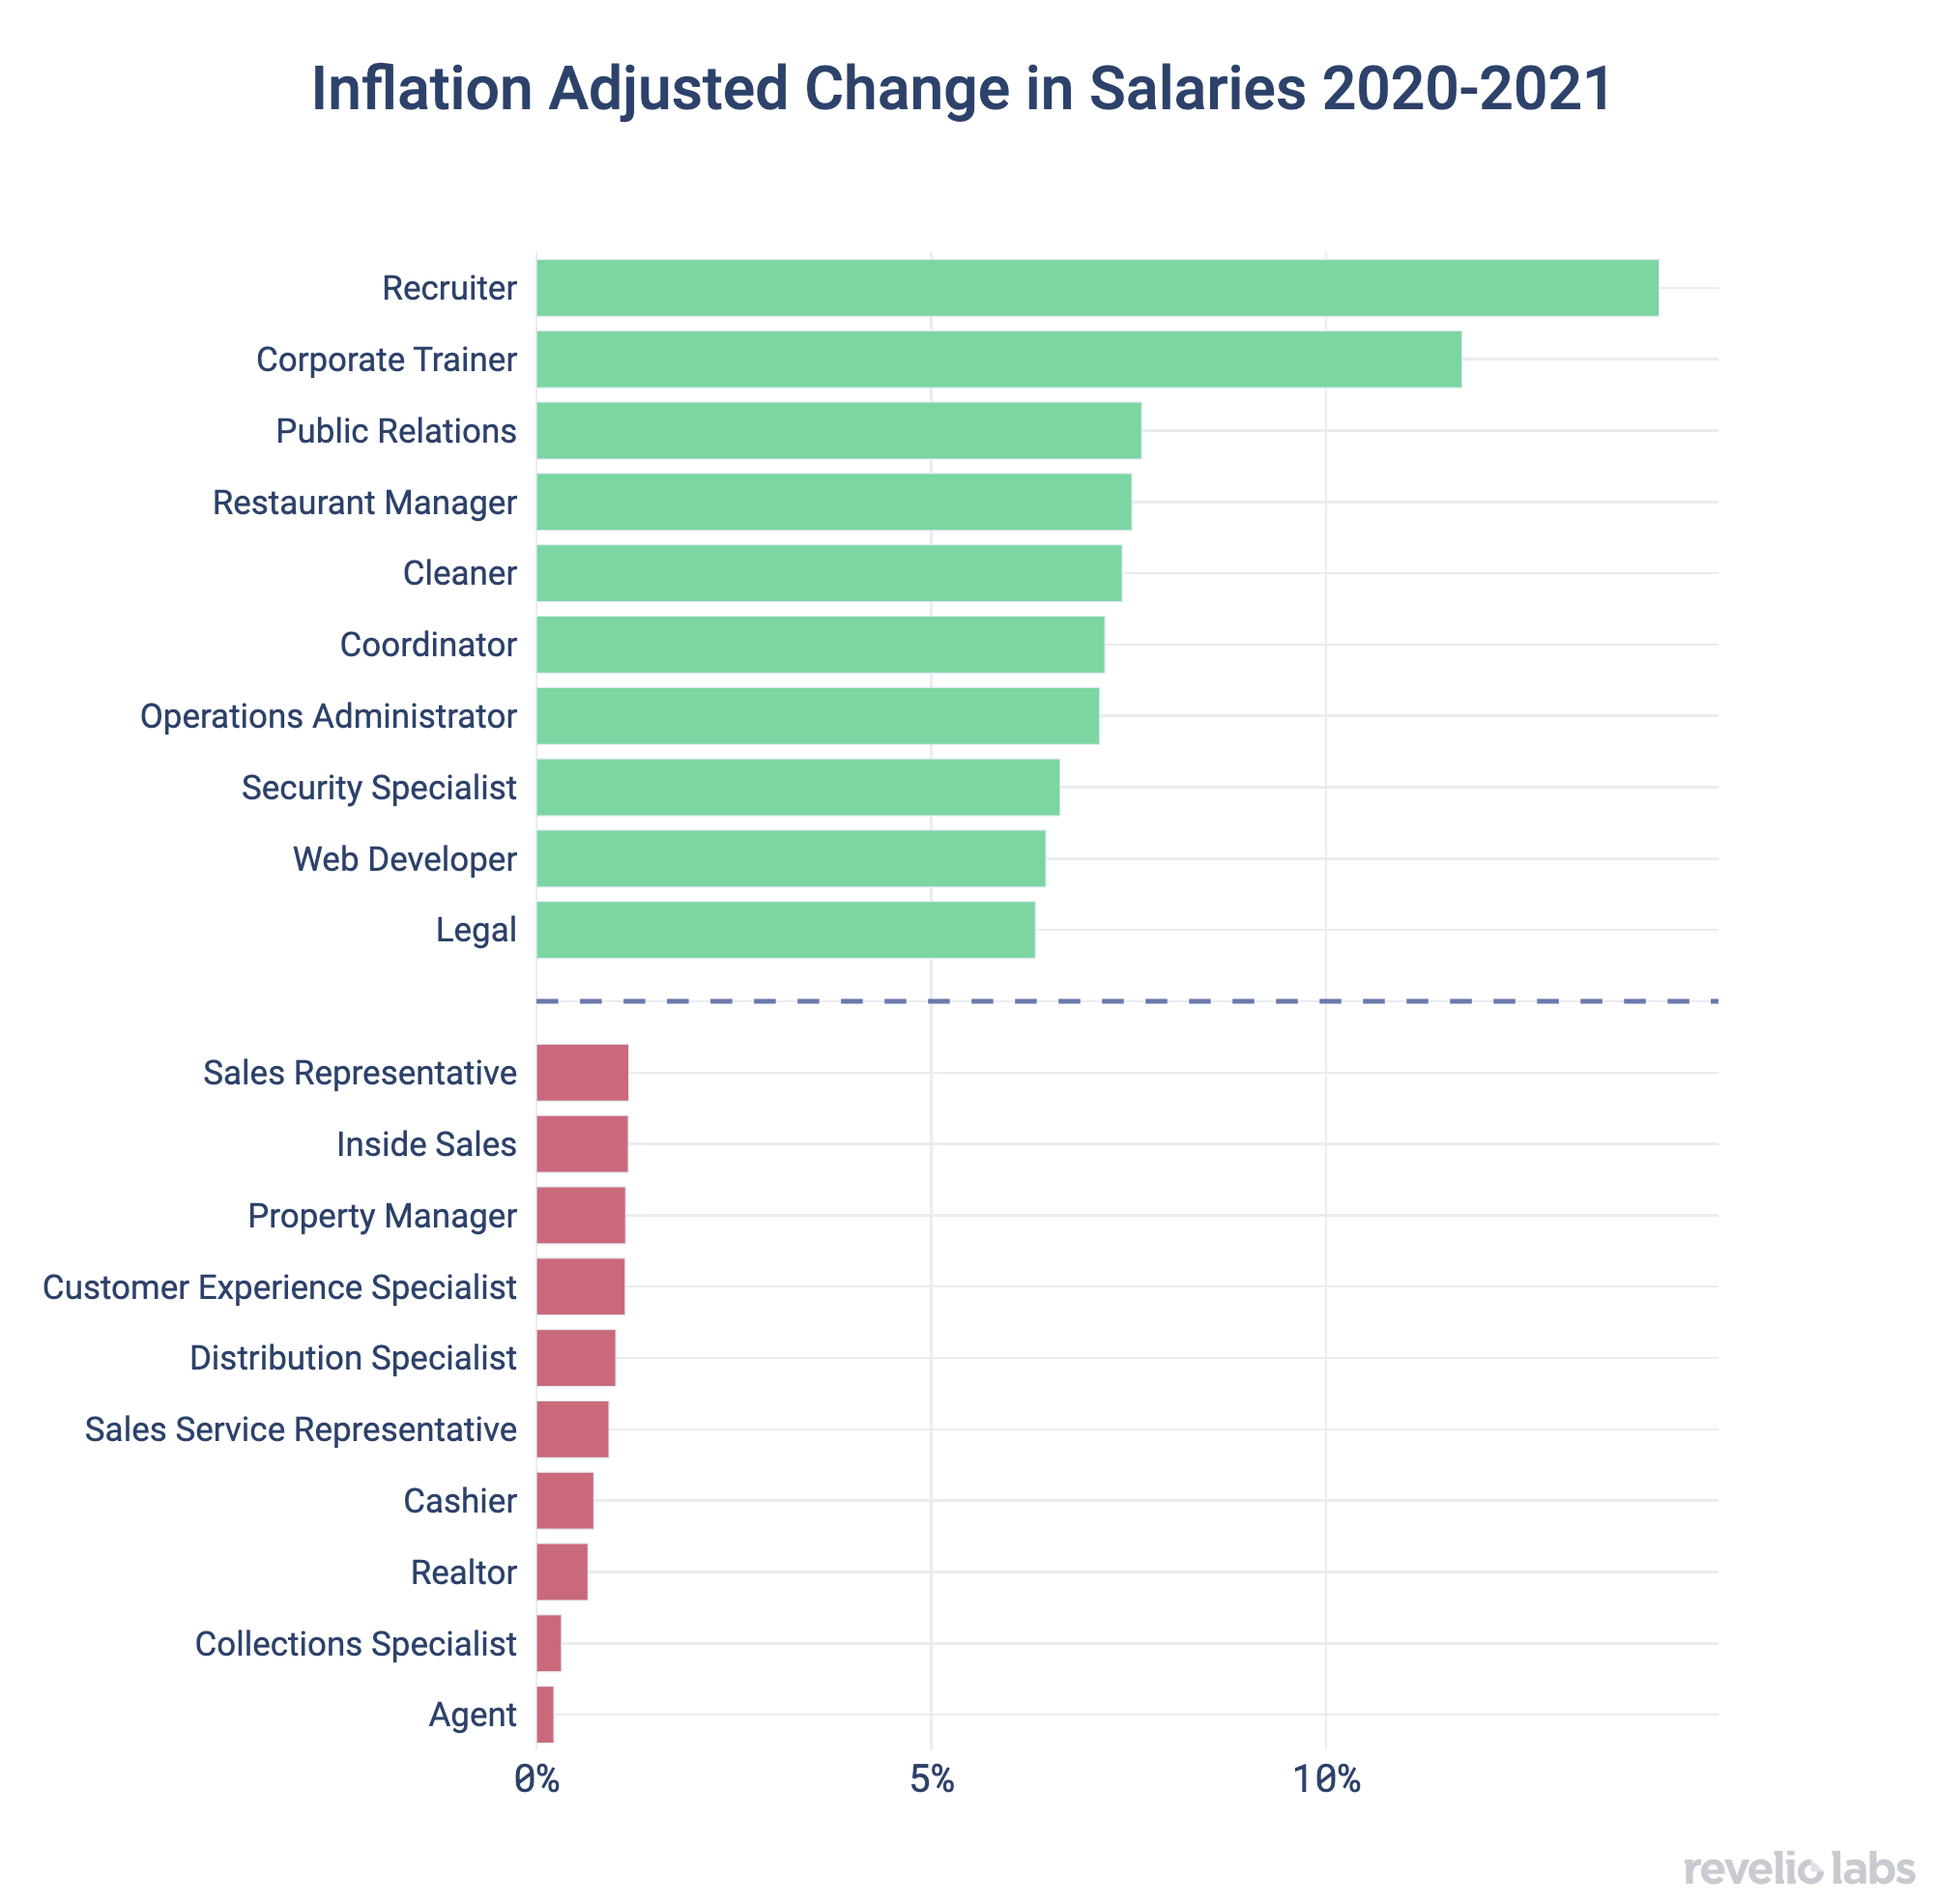 Inflation Adjusted Change in Salaries 2020-2021